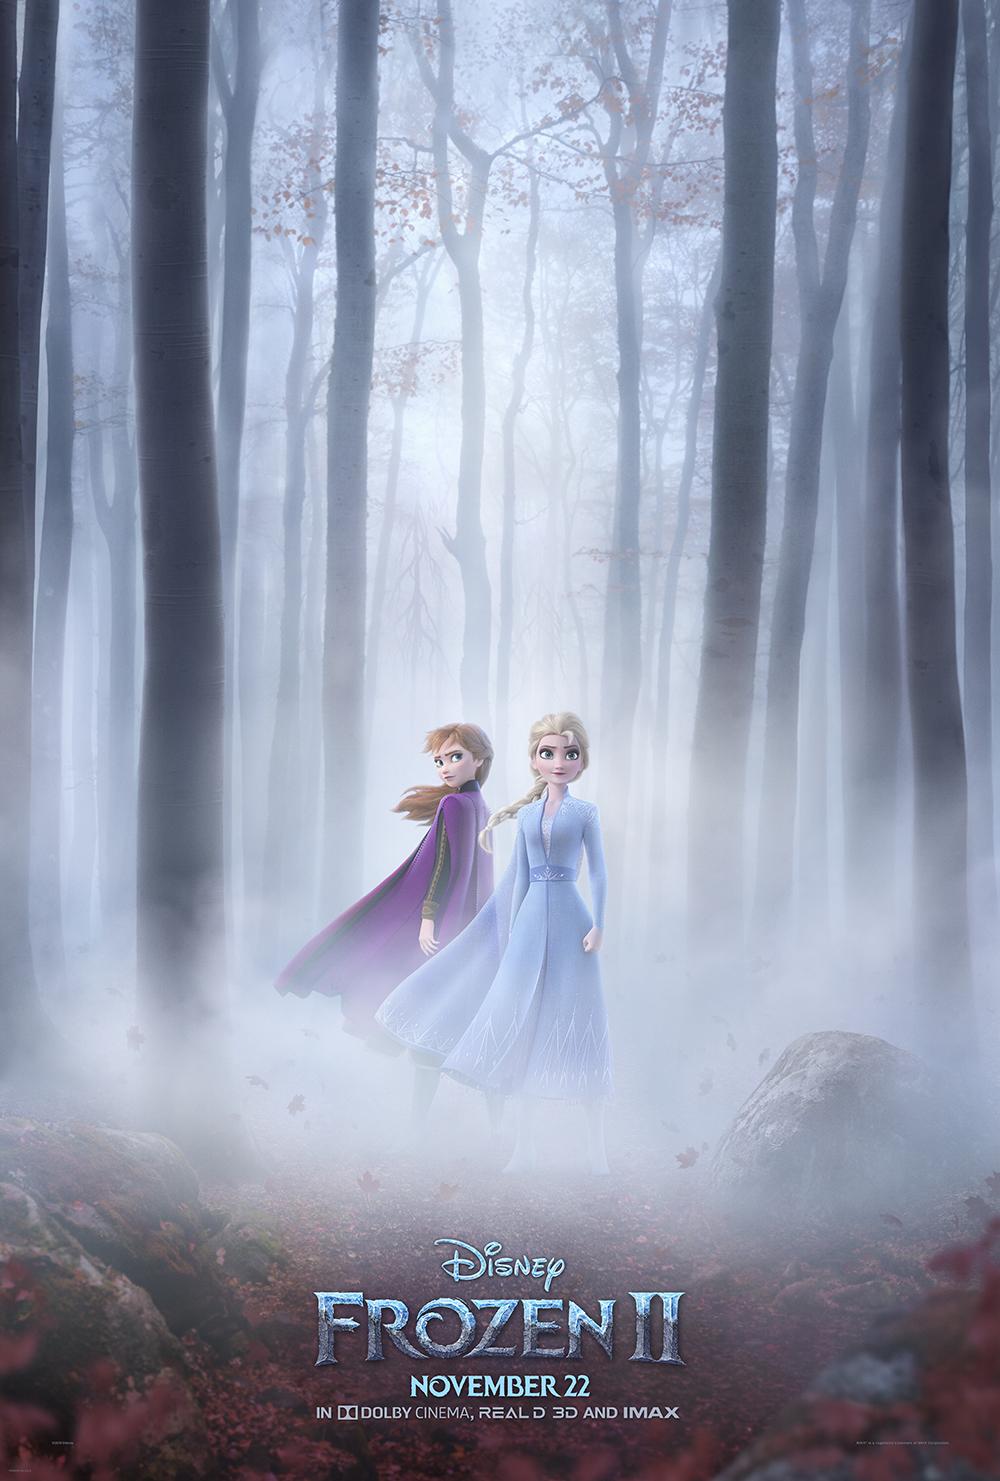 New Frozen 2 Has Anna, Elsa, and Olaf on a Magical